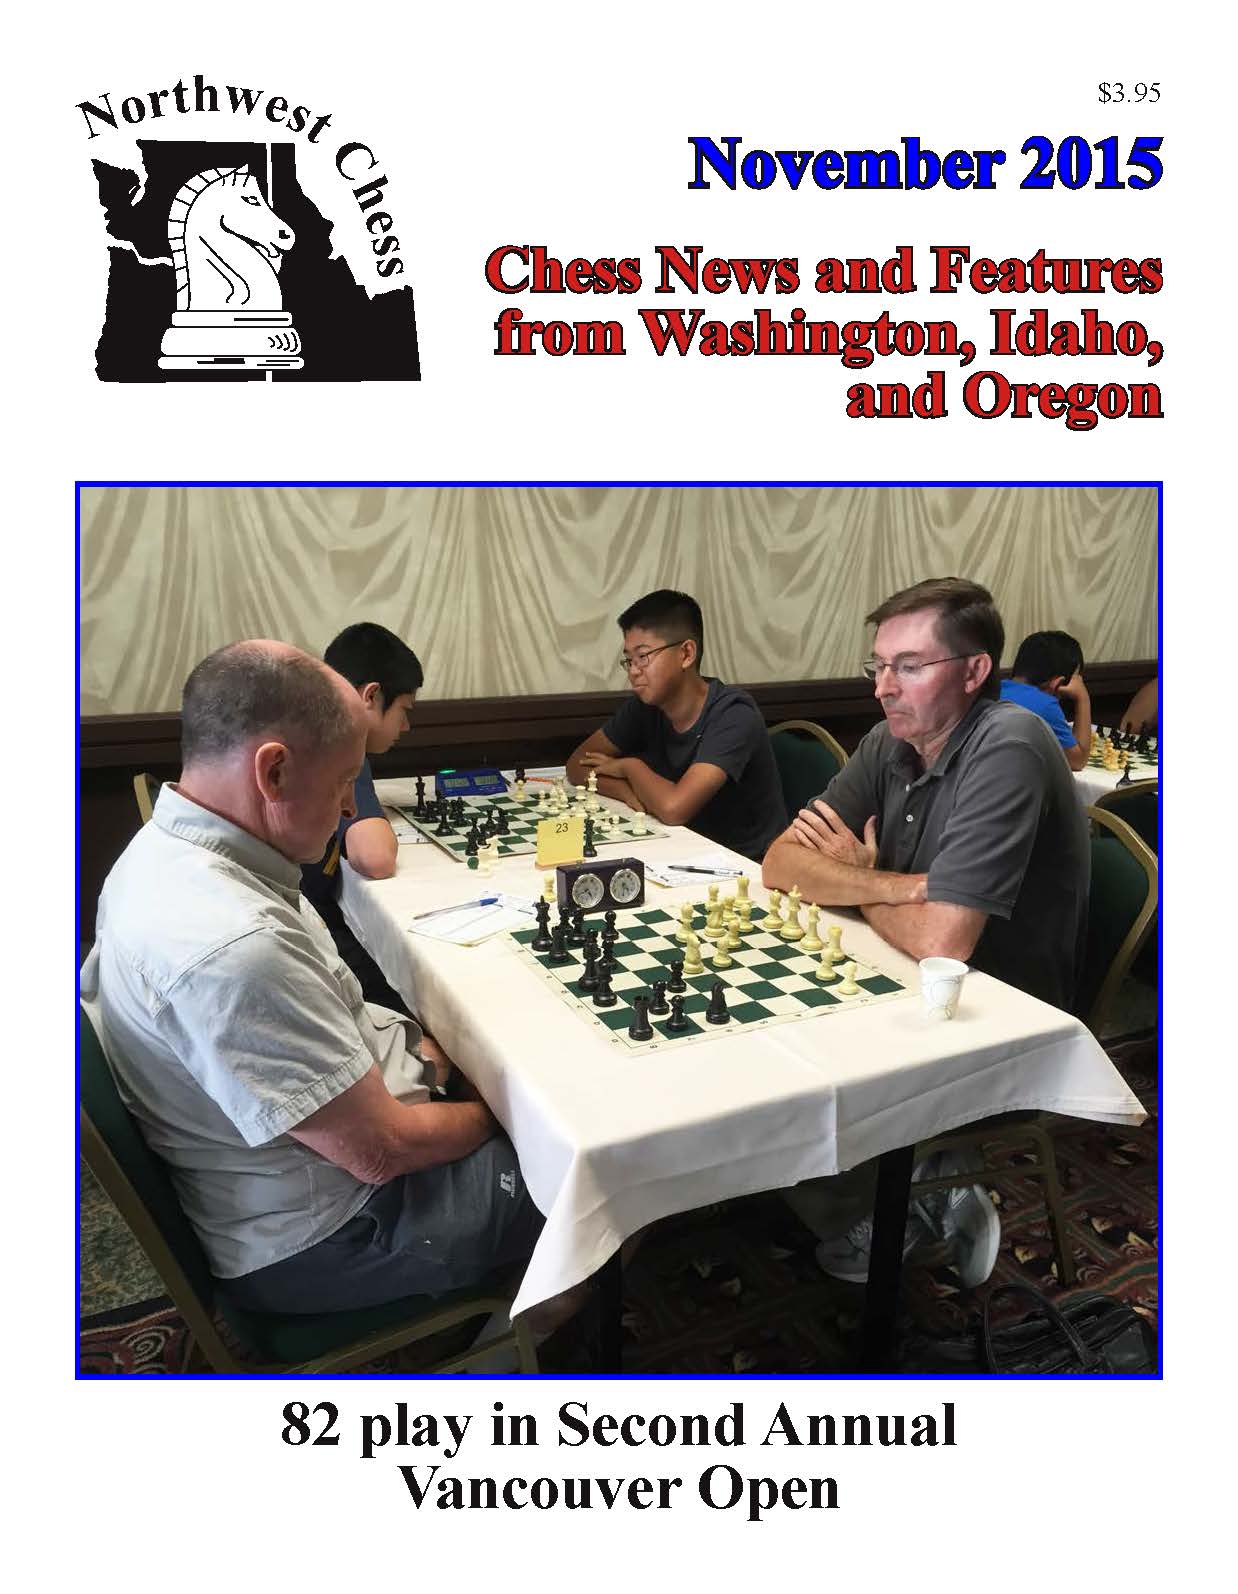 Chess Daily News by Susan Polgar - 5 perfect scores after 3 in Dubai